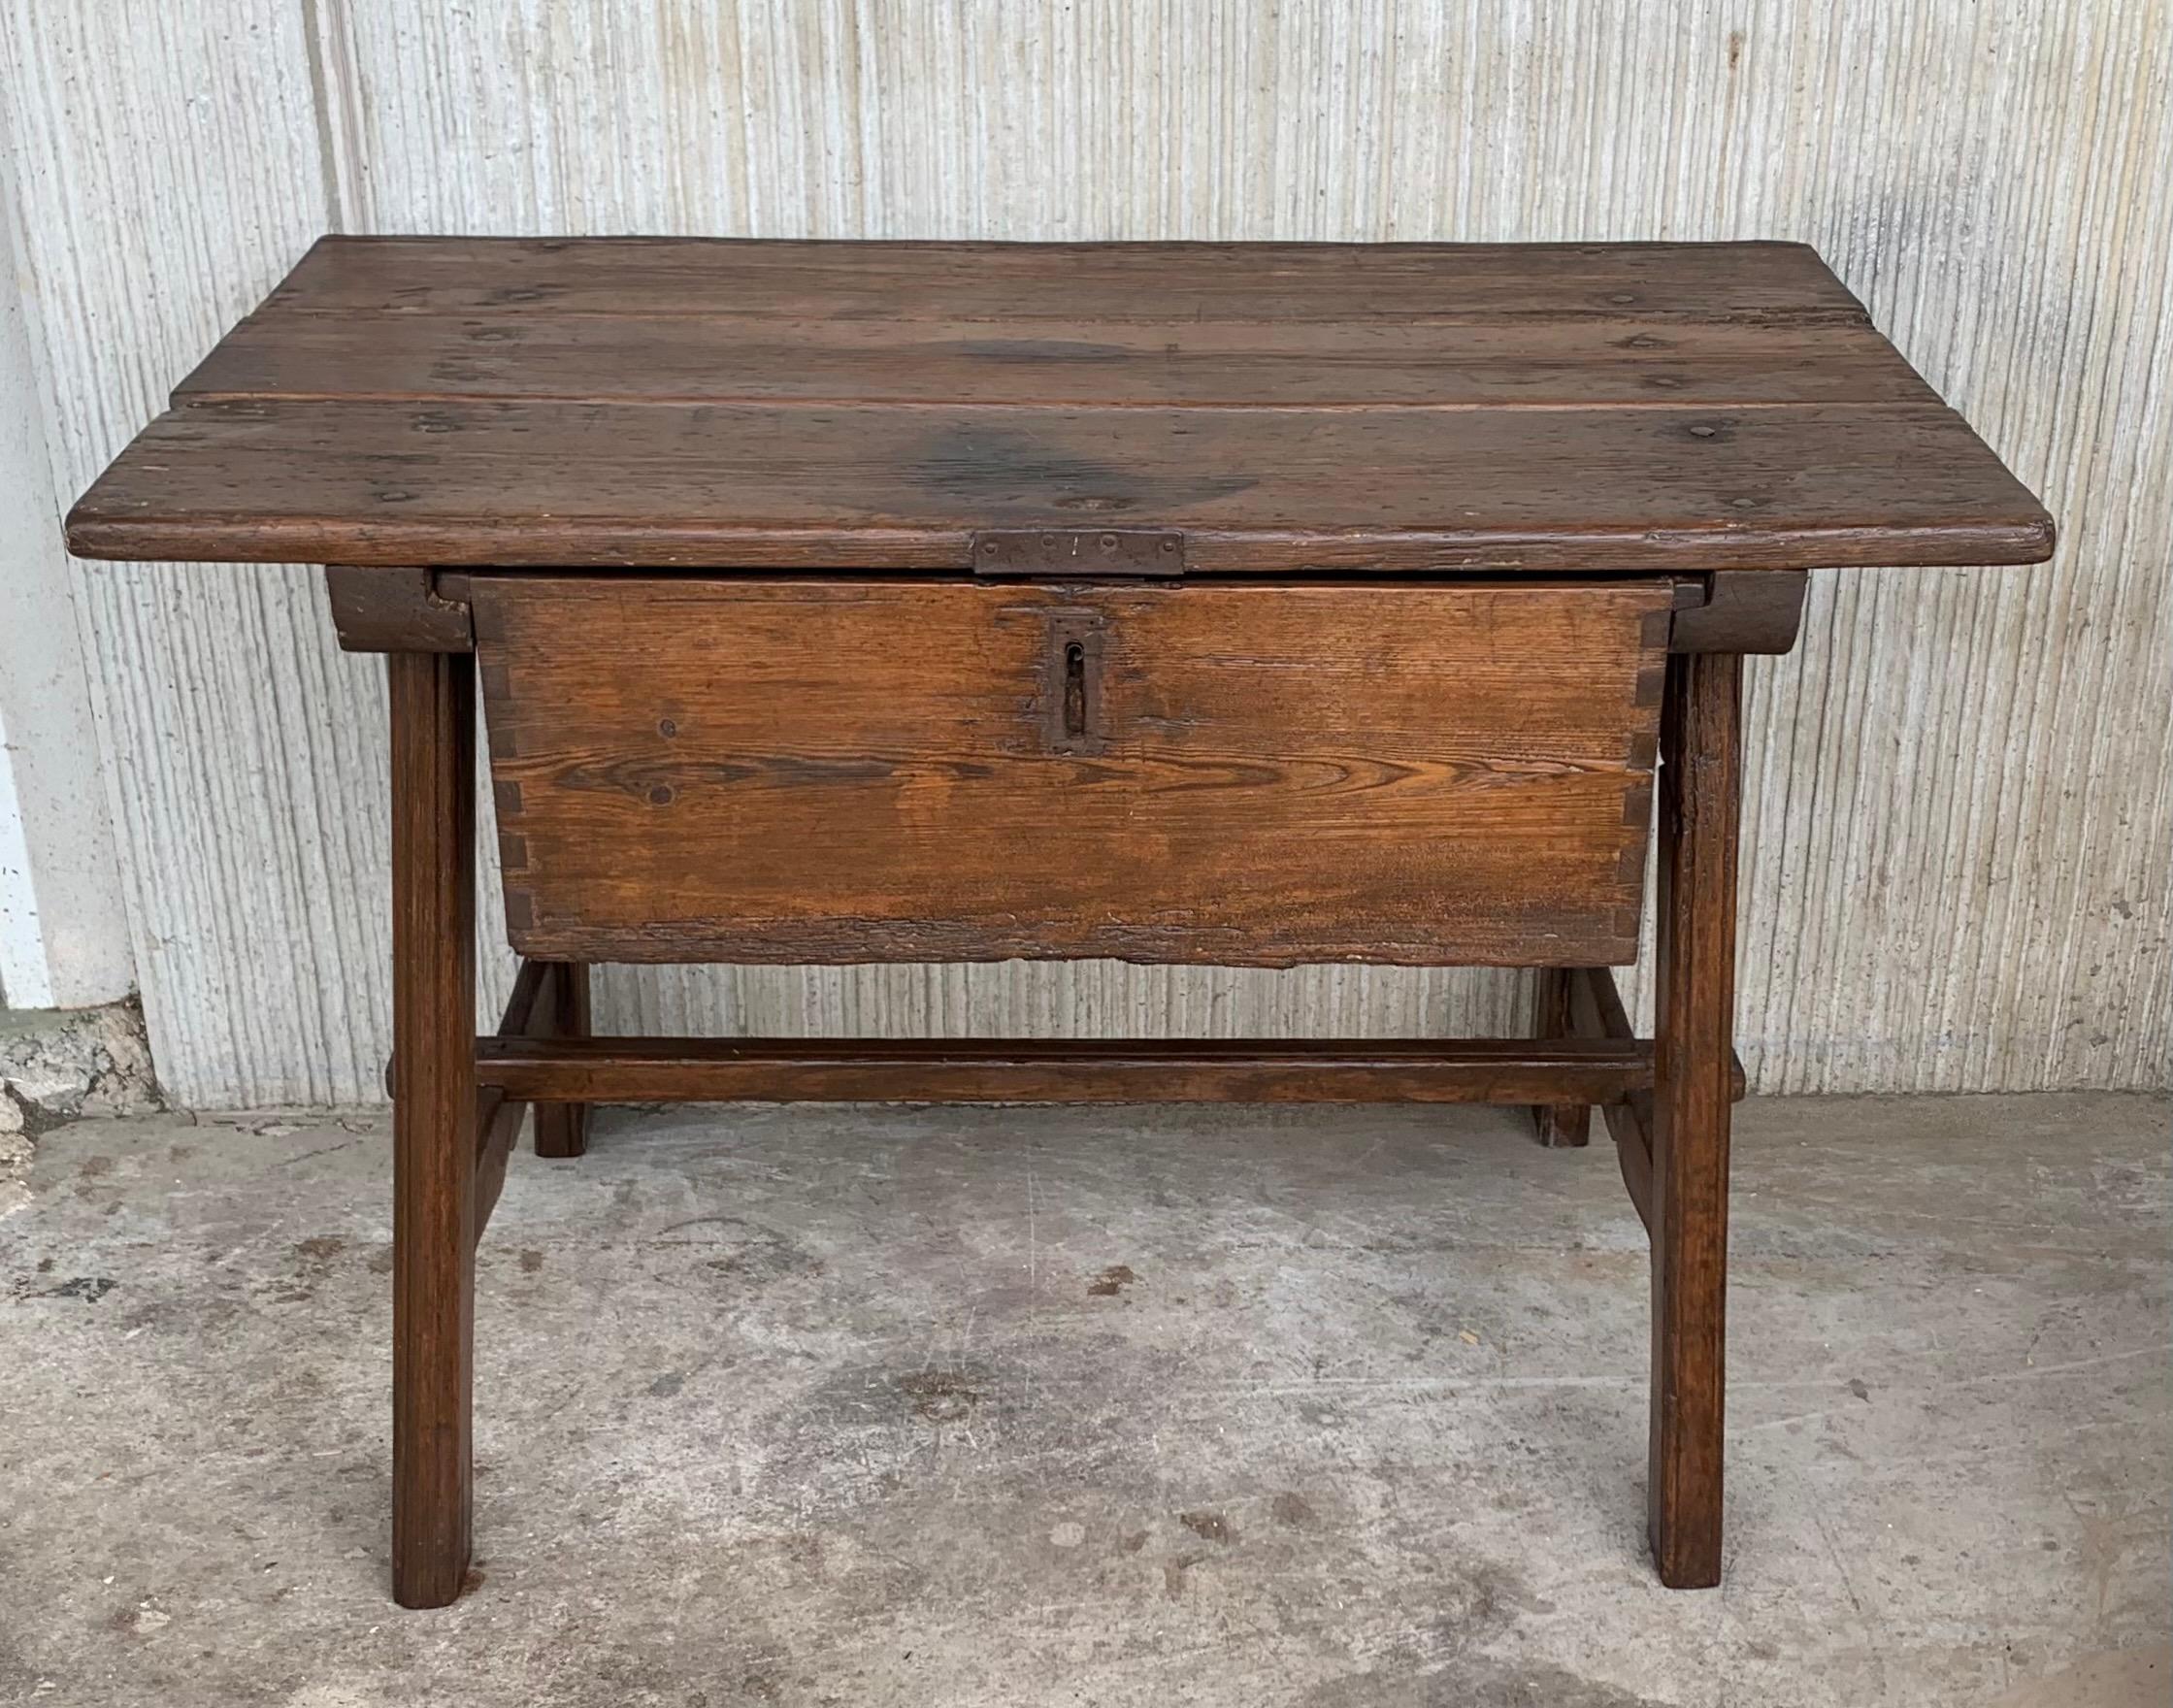 A Spanish walnut side table with single drawer, scalloped apron and trestle legs from the early 19th century. This elegant Spanish table features a simple, rectangular top, sitting above a drawer. The table is raised on an exquisite base, made of